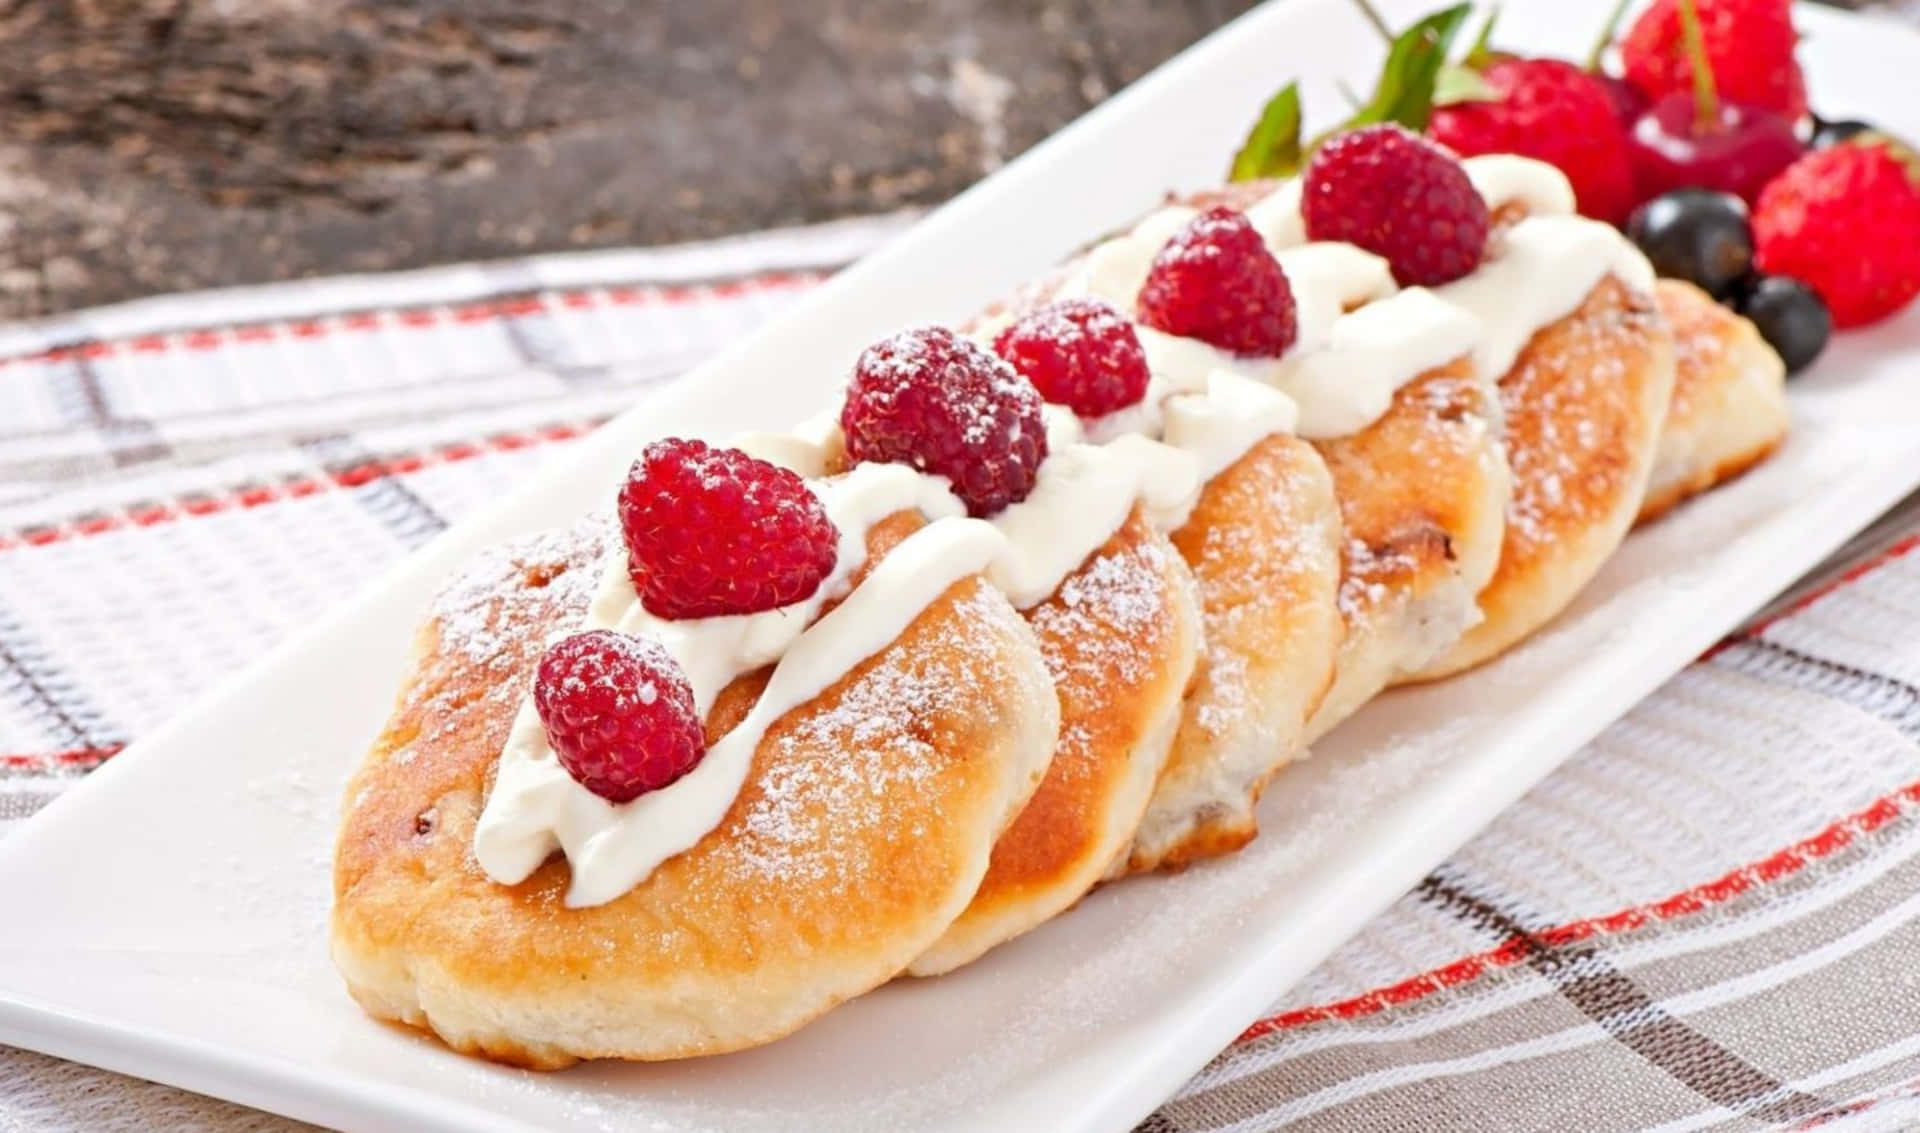 A Plate With A Pastry With Berries And Cream